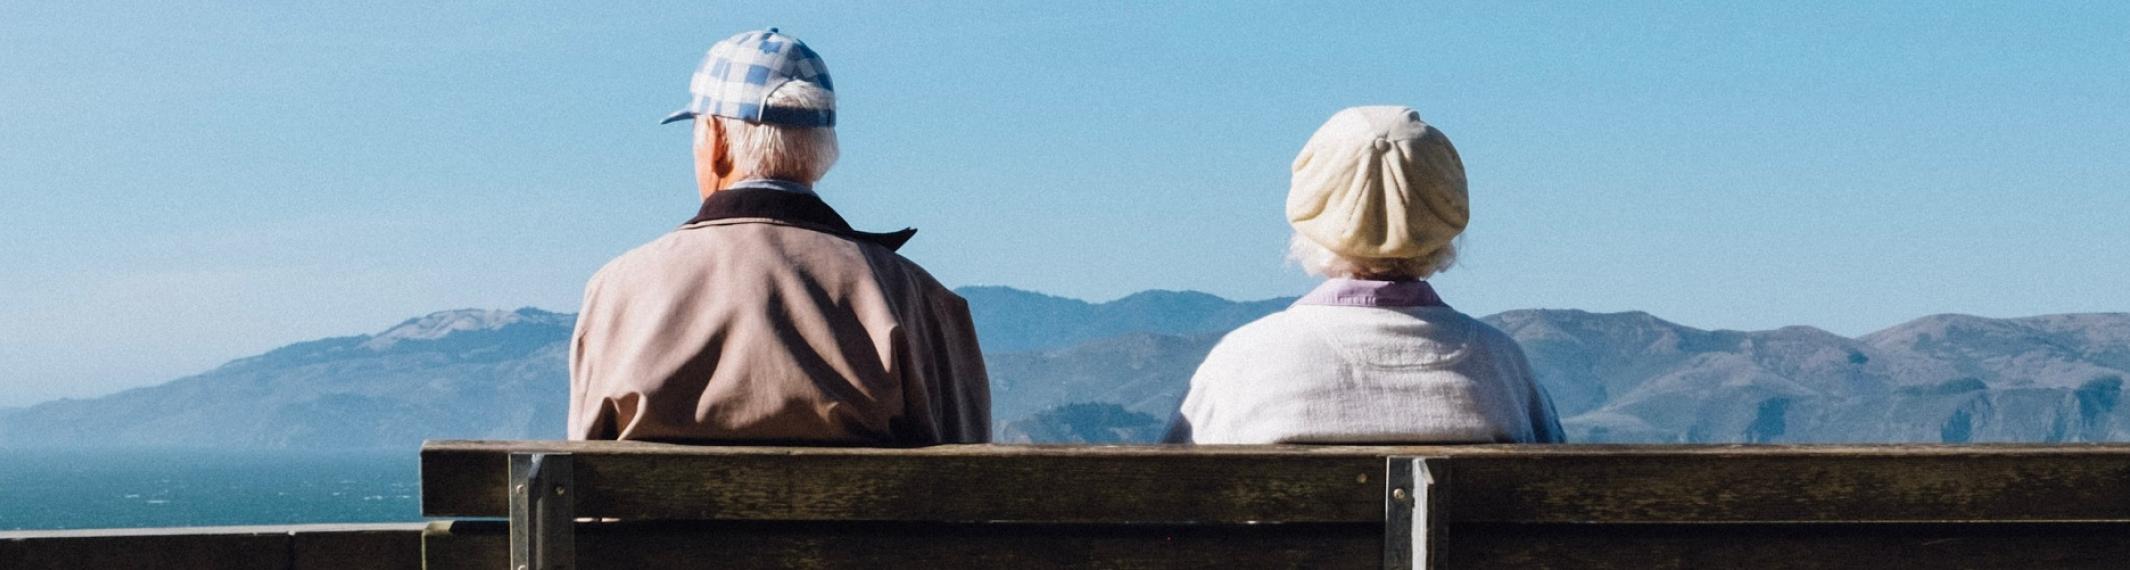 An older couple sits on a bench overlooking a mountain view.